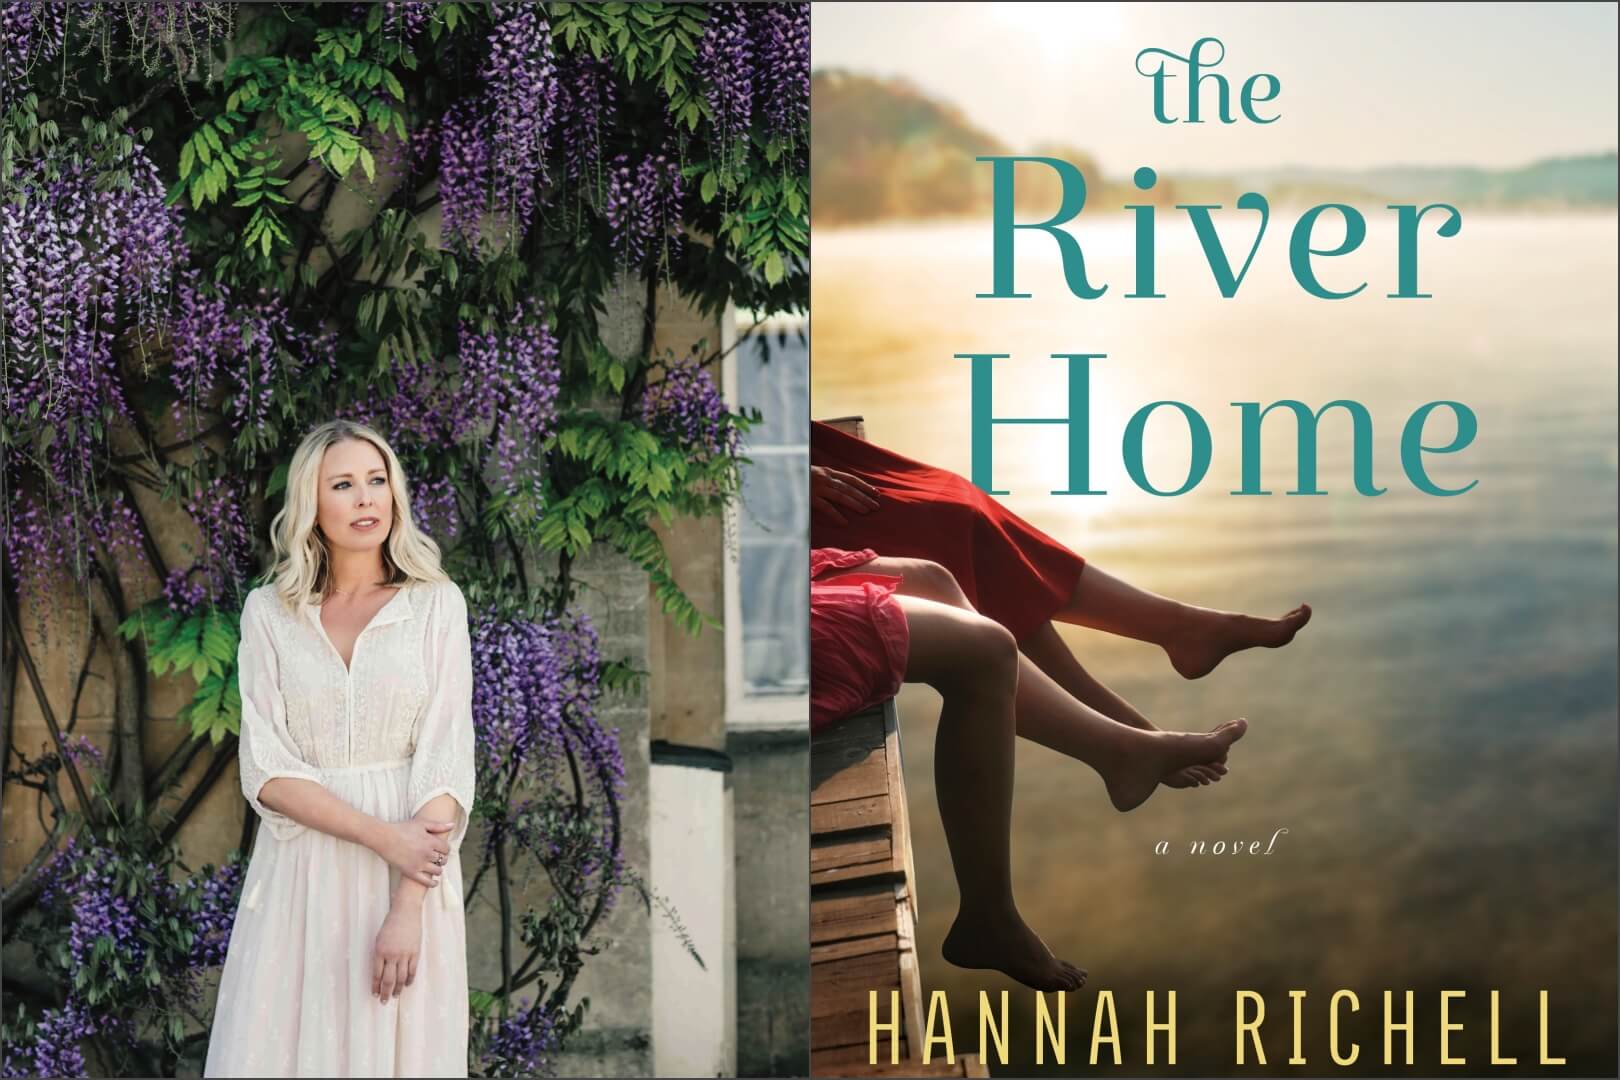 Q&A with Hannah Richell, Author of The River Home